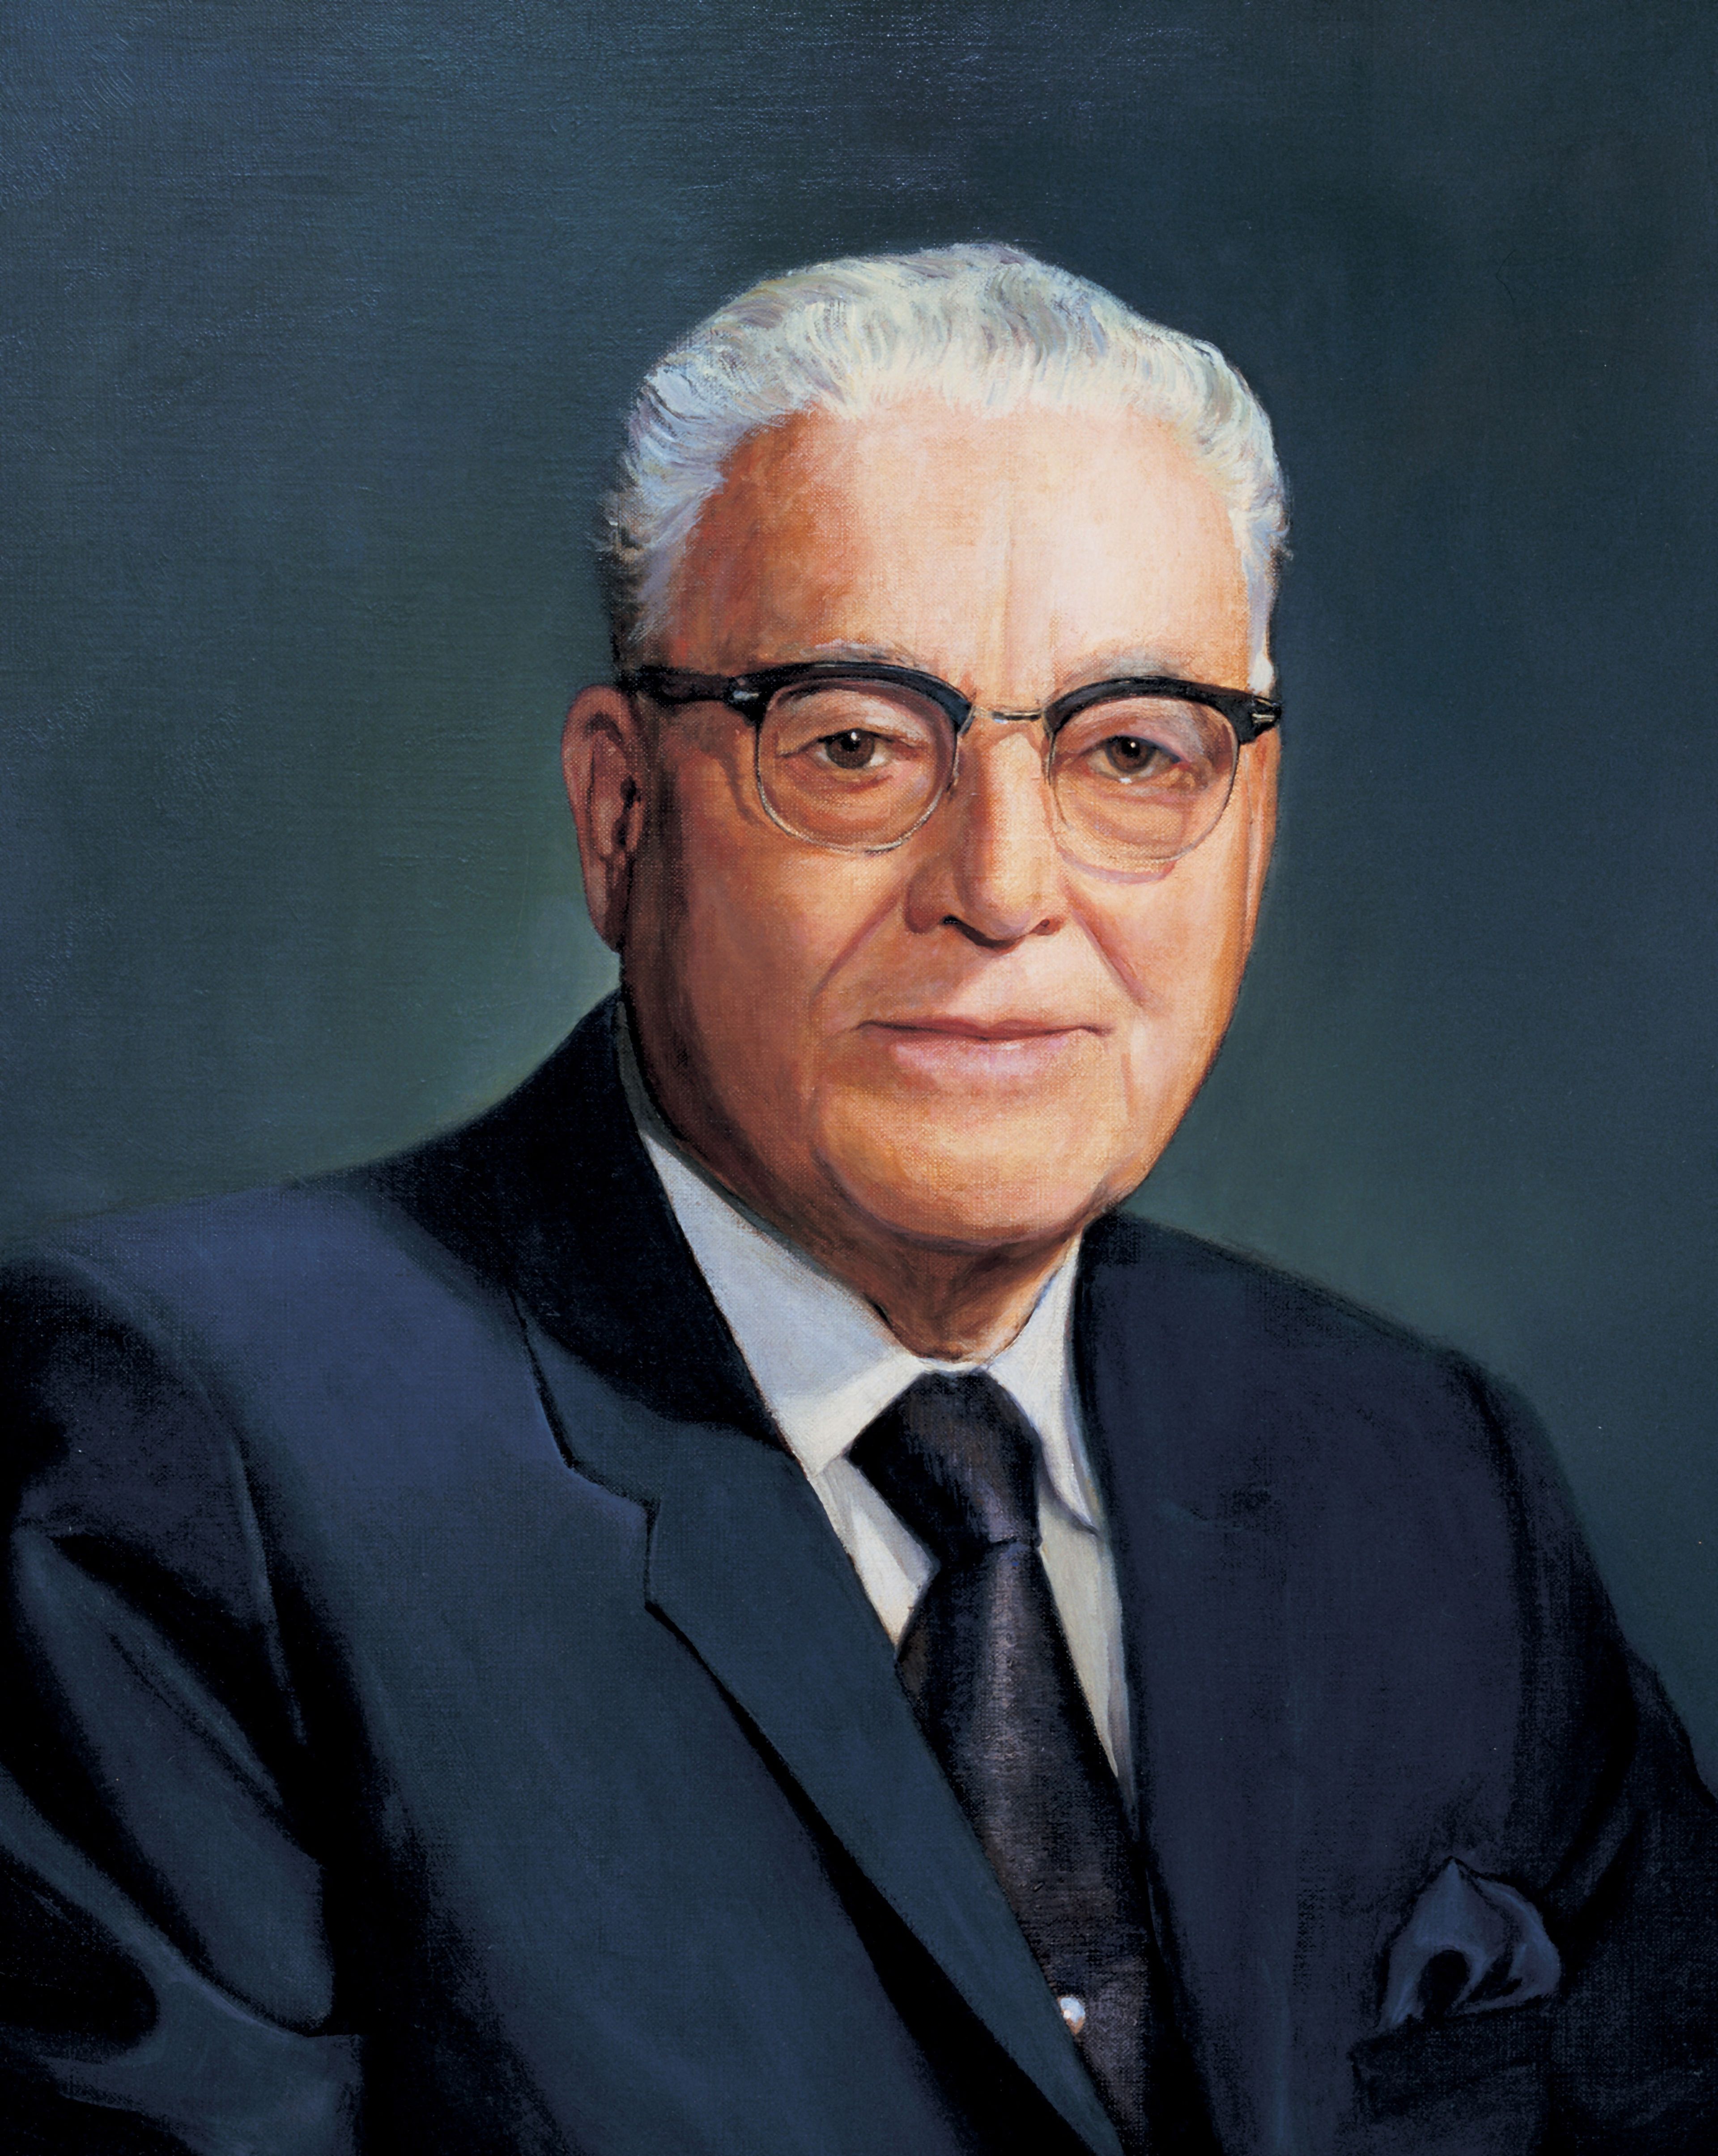 Harold B. Lee, by David Ahrnsbrak; GAK 516; Our Heritage, 123–24. President Harold B. Lee served as the 11th President of the Church from 1972 to 1973.